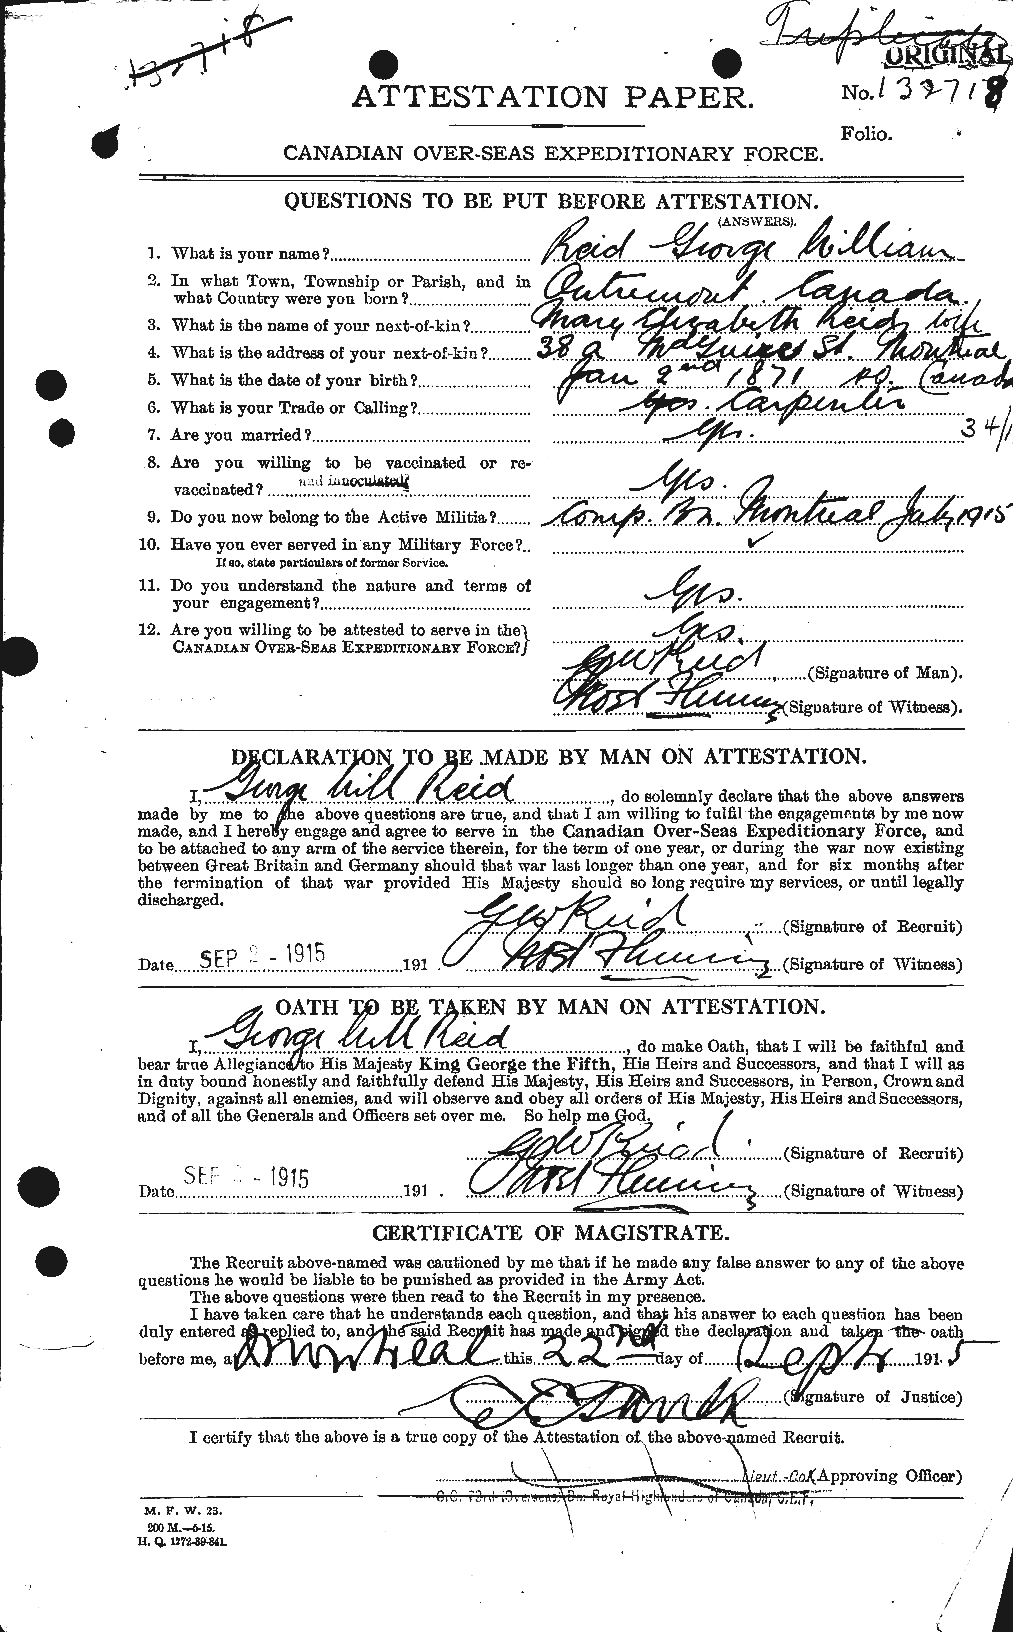 Personnel Records of the First World War - CEF 598550a